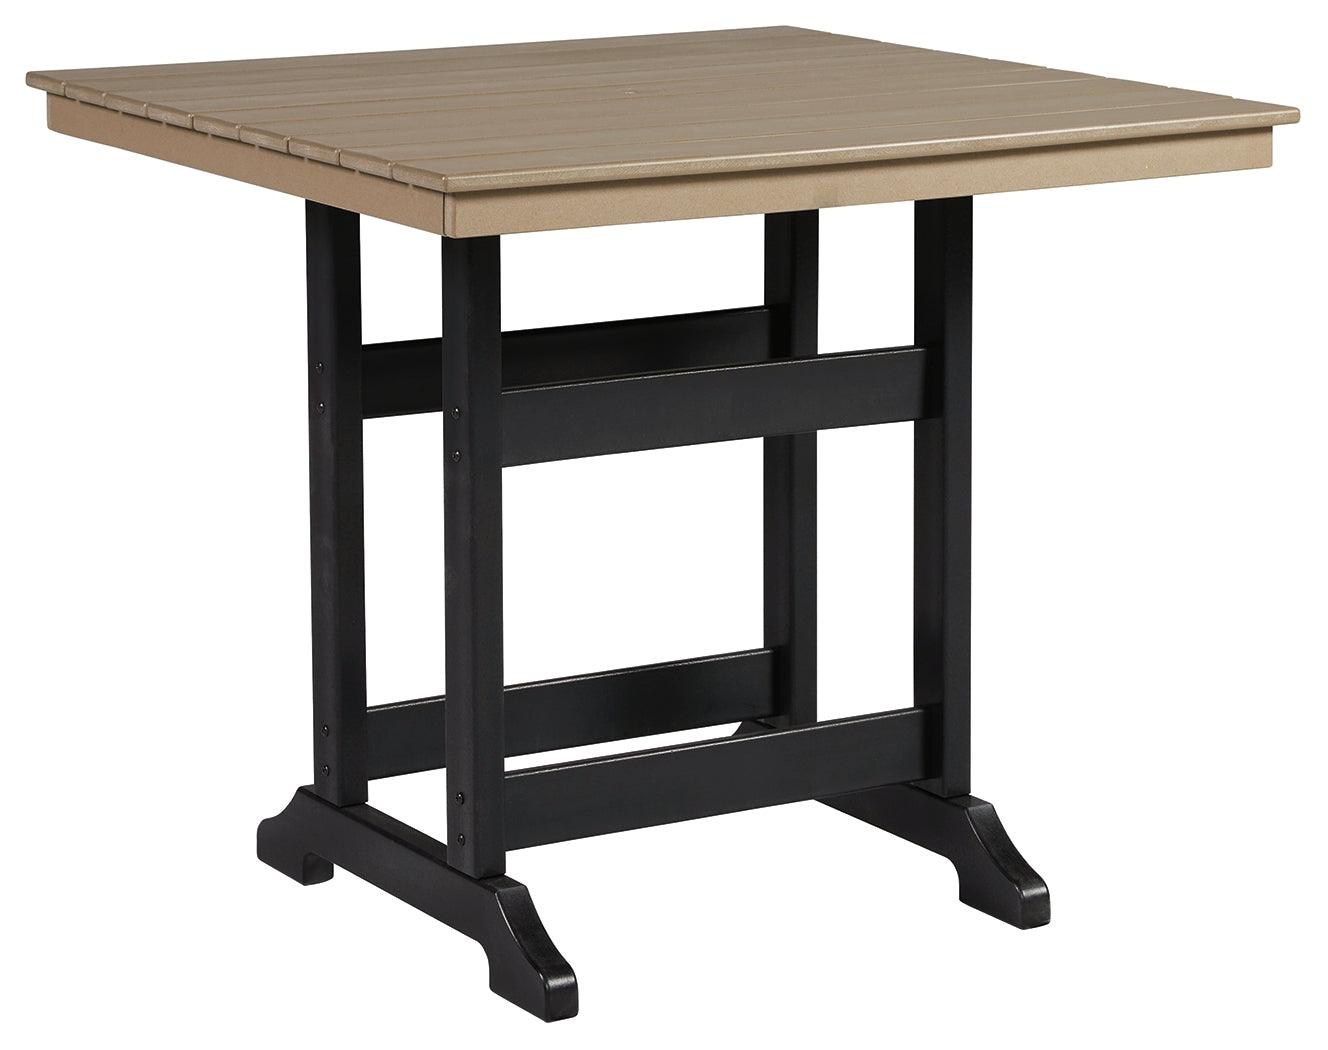 Fairen Trail Black/driftwood Outdoor Counter Height Dining Table - Ella Furniture